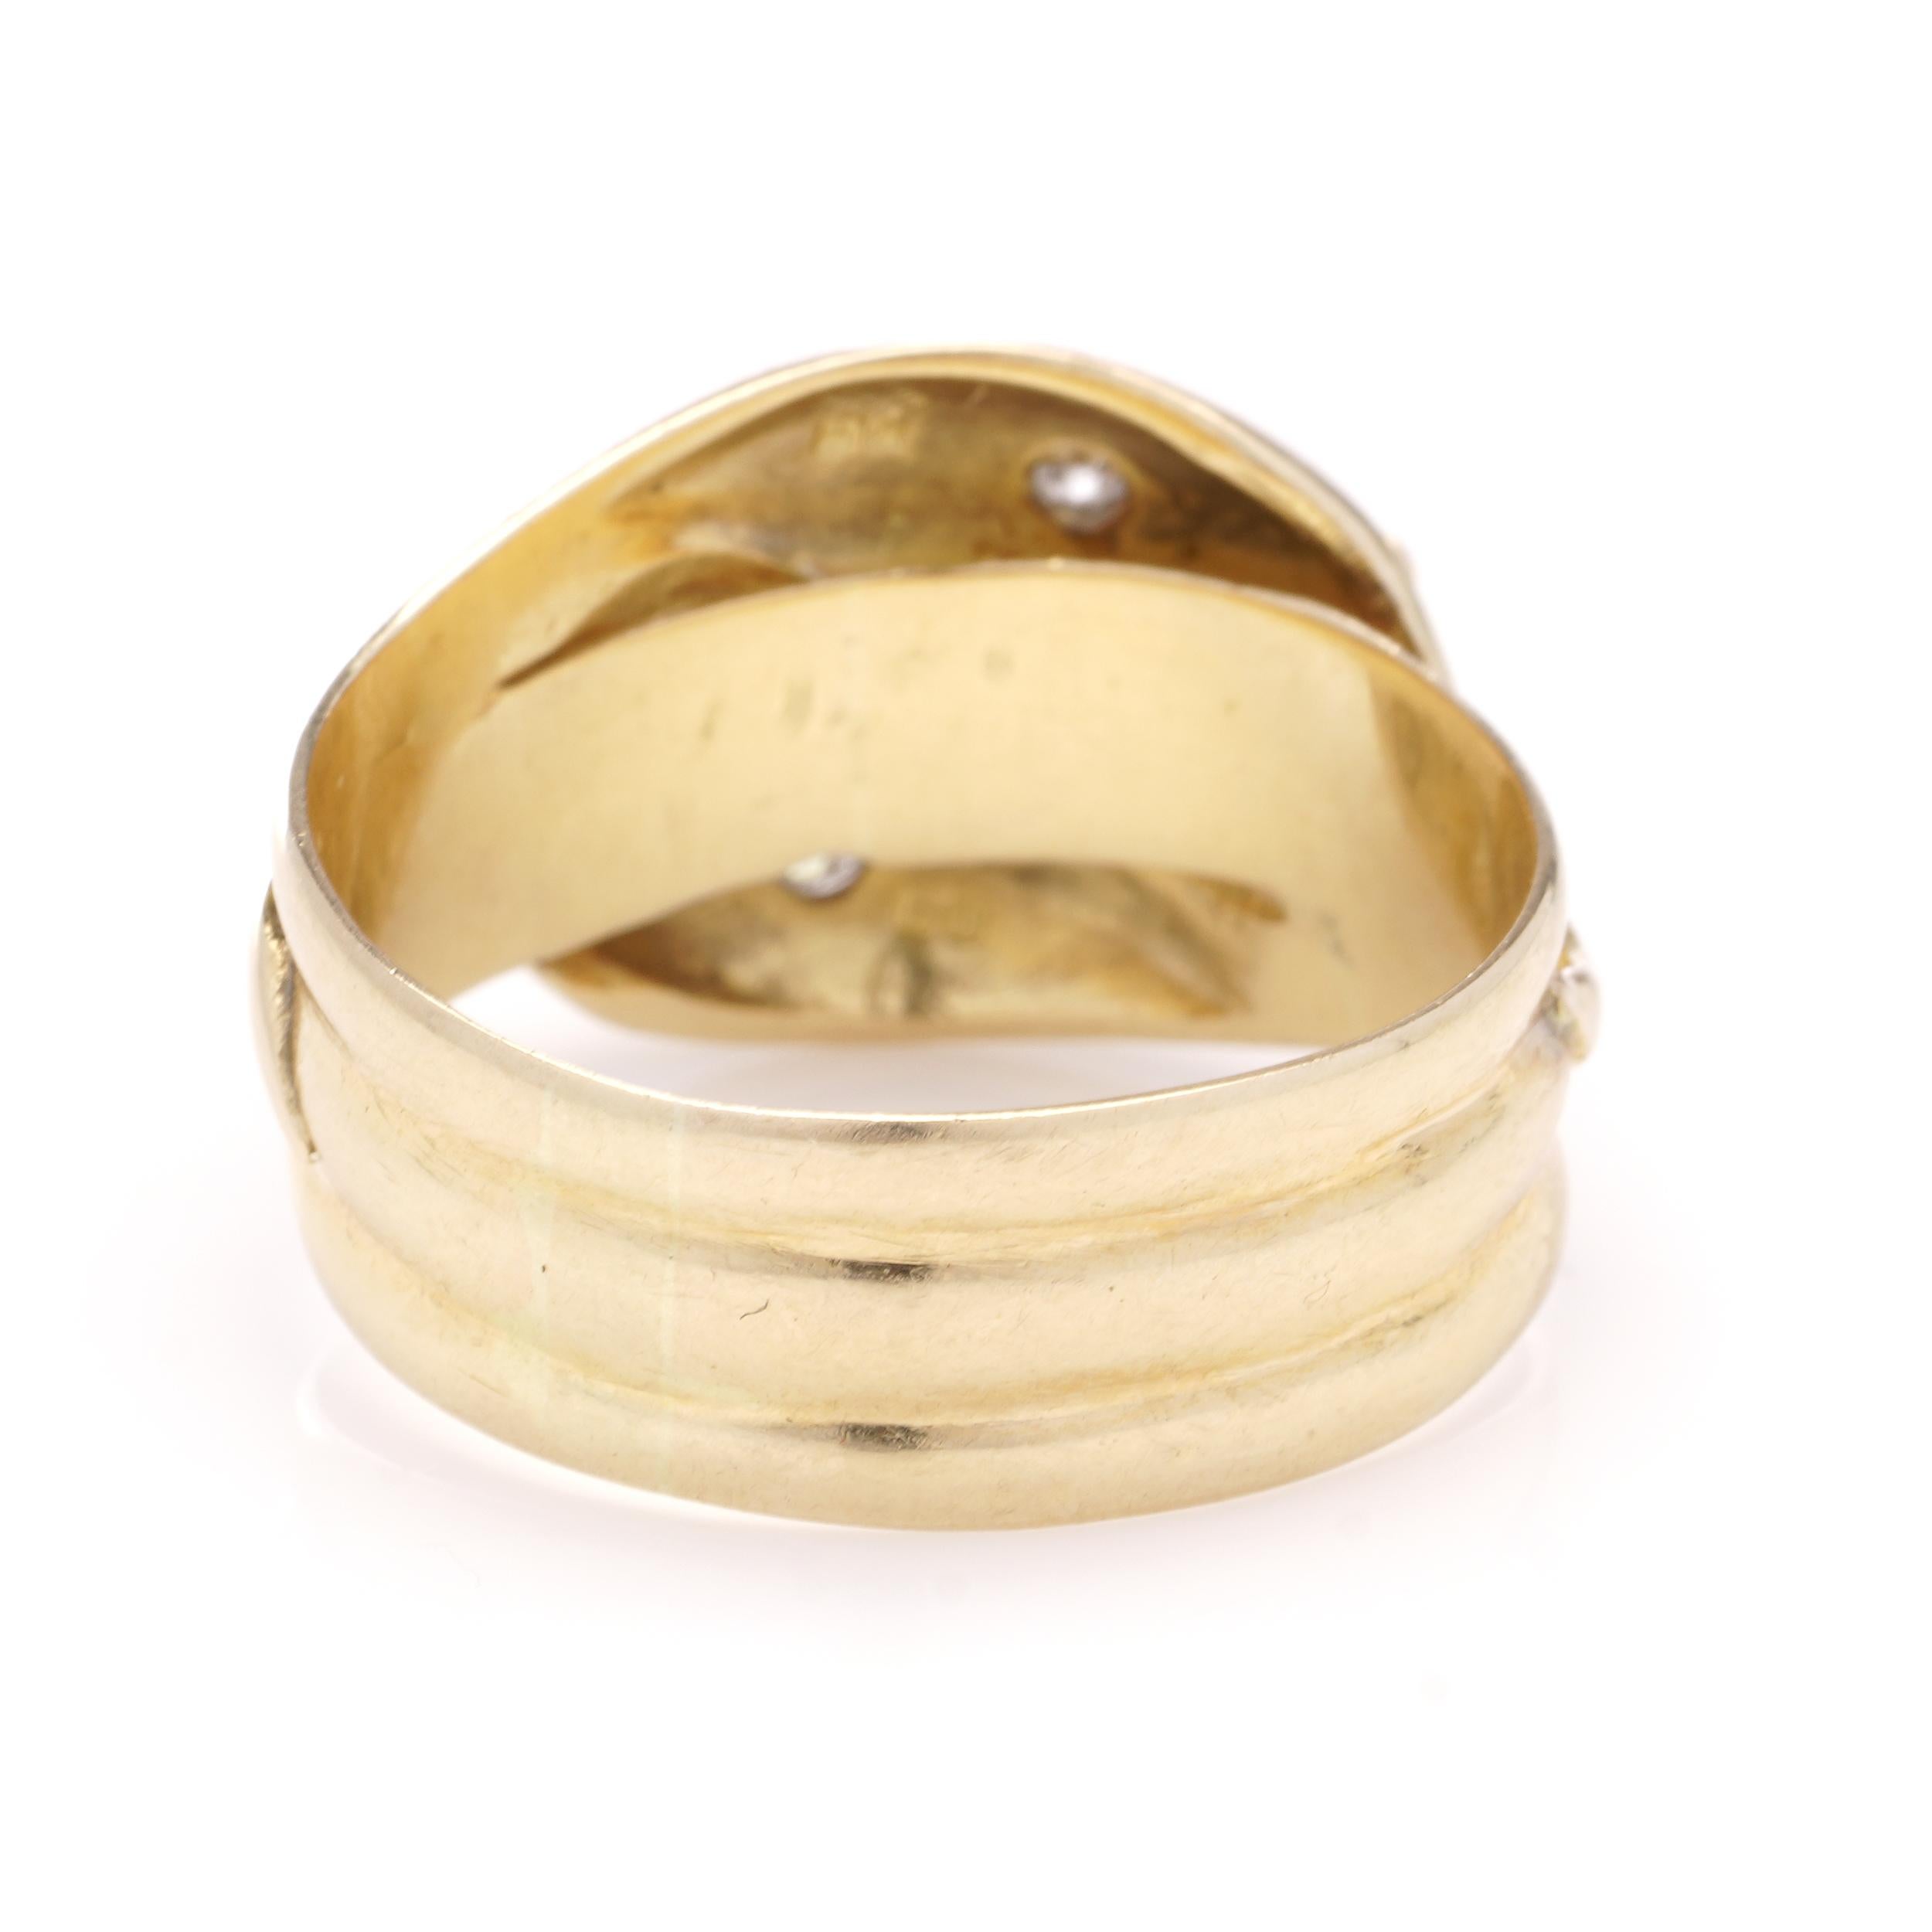 Antique 18kt yellow gold men's band ring in the shape of a pair of coiled snakes For Sale 2